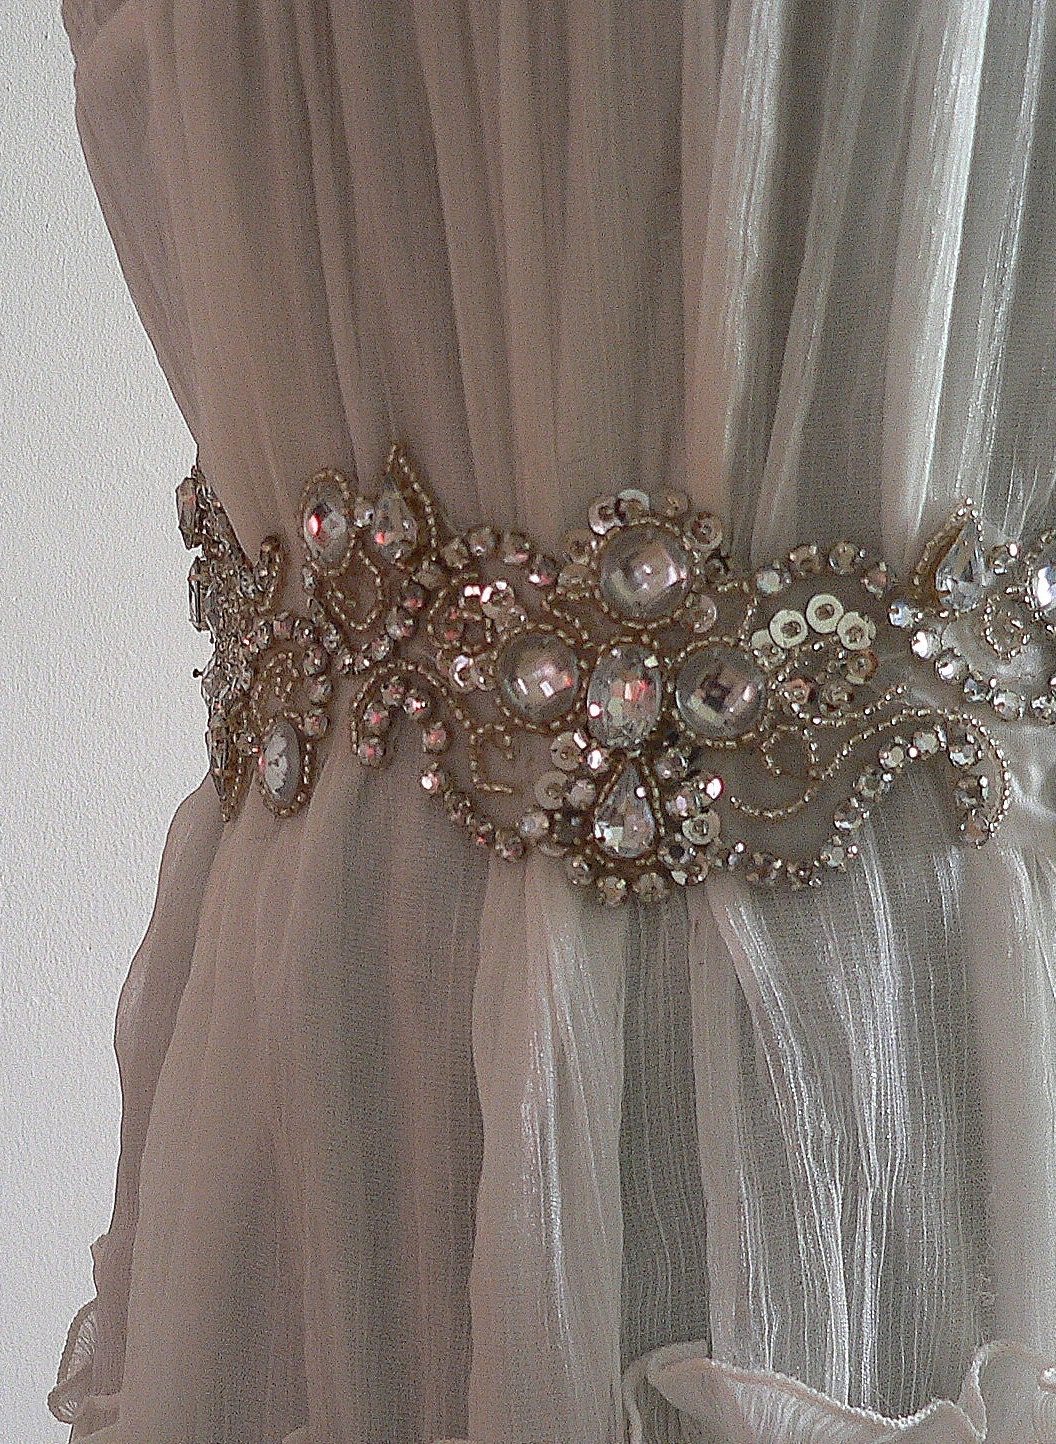 I 39m looking for an embellished belt for my wedding dress Any ideas